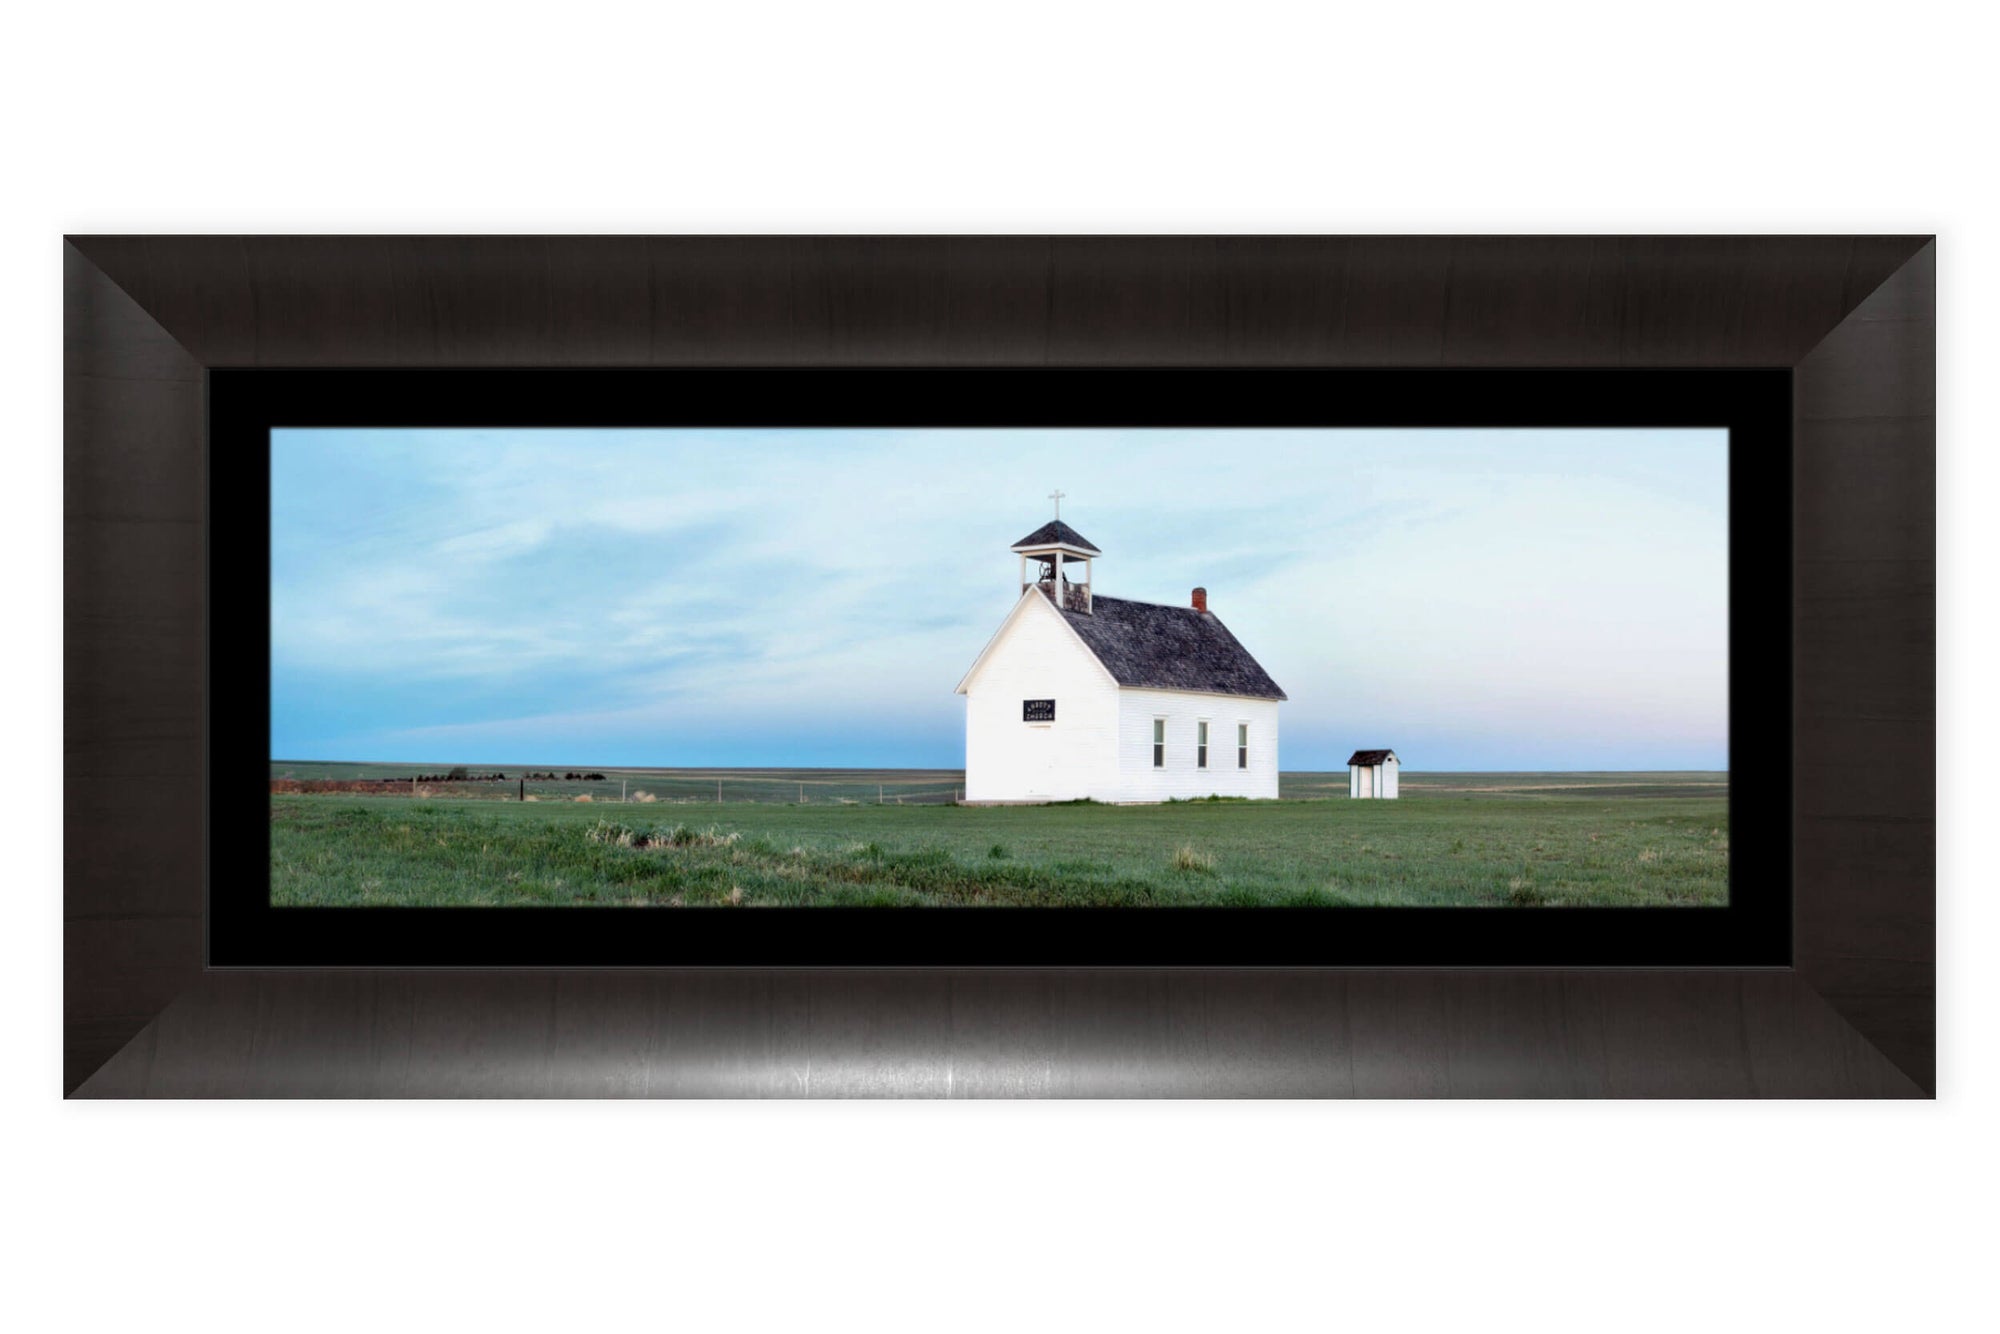 A framed picture of the Abbott Church near Lindon, part of Colorado settler history.